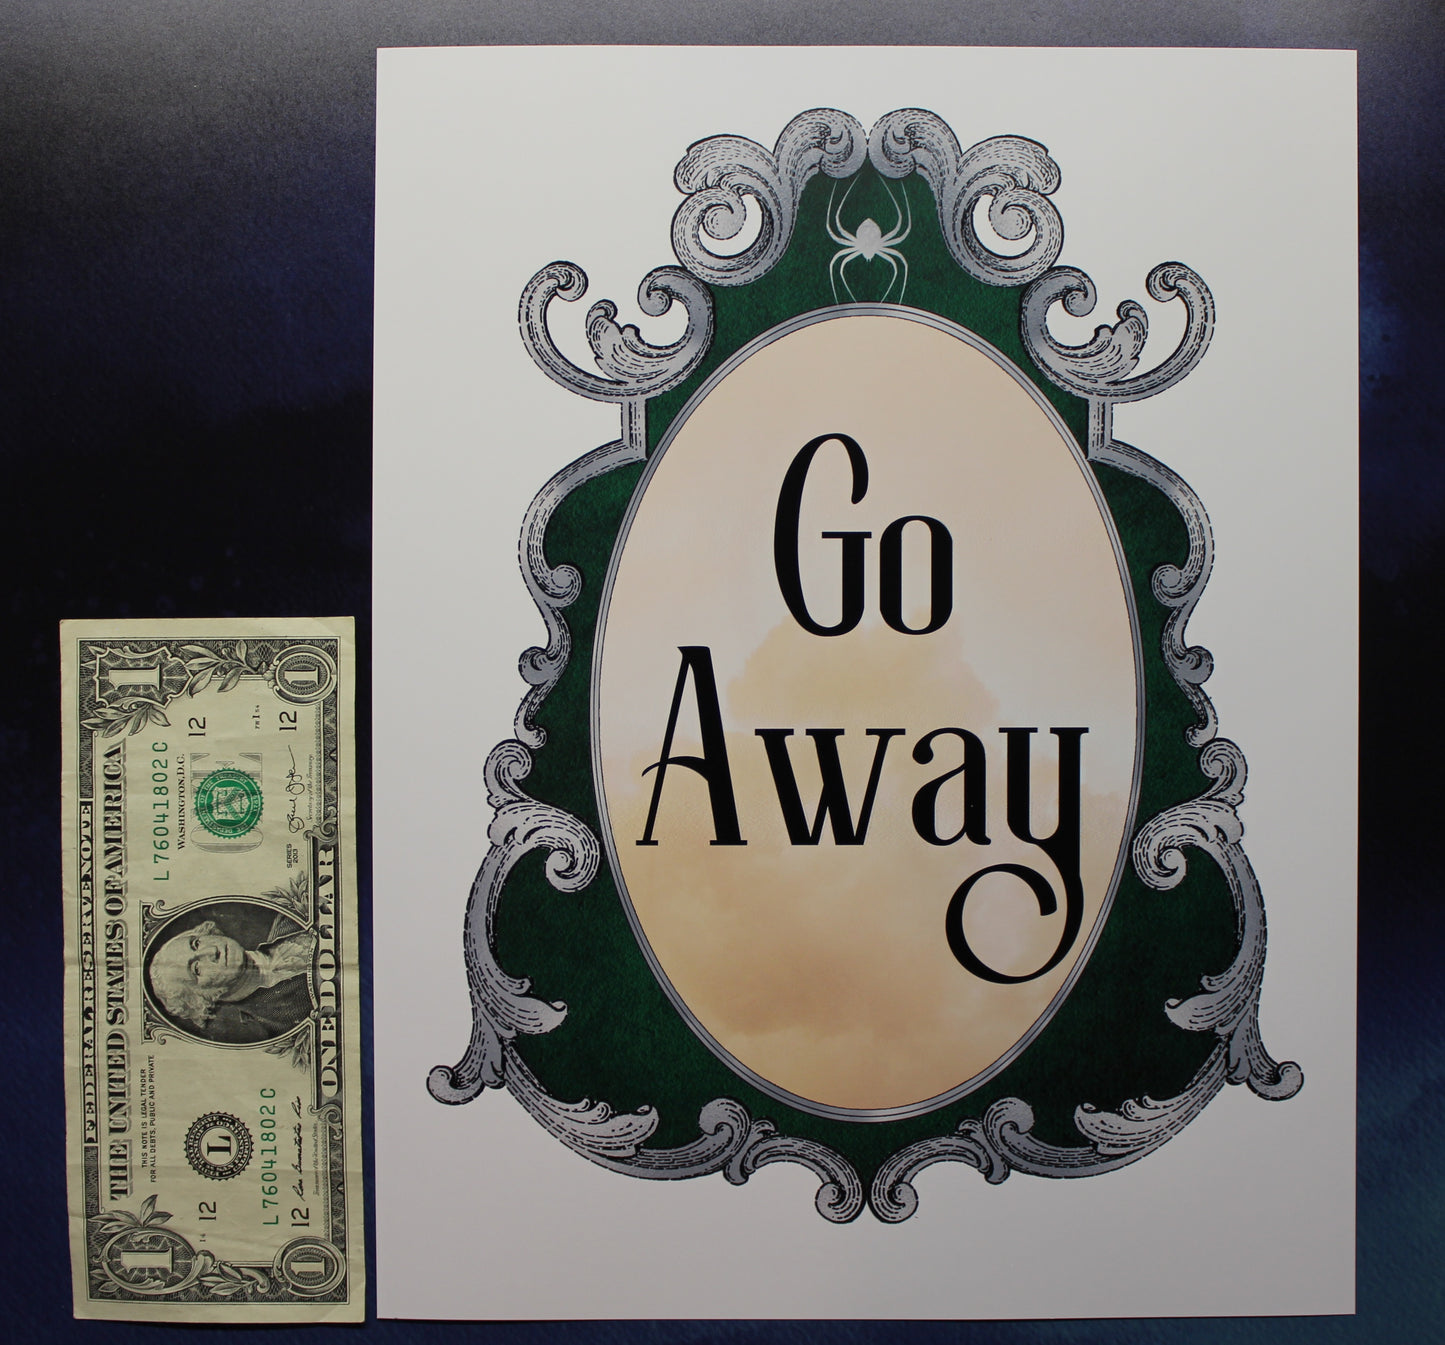 Go Away Print Ready to be framed